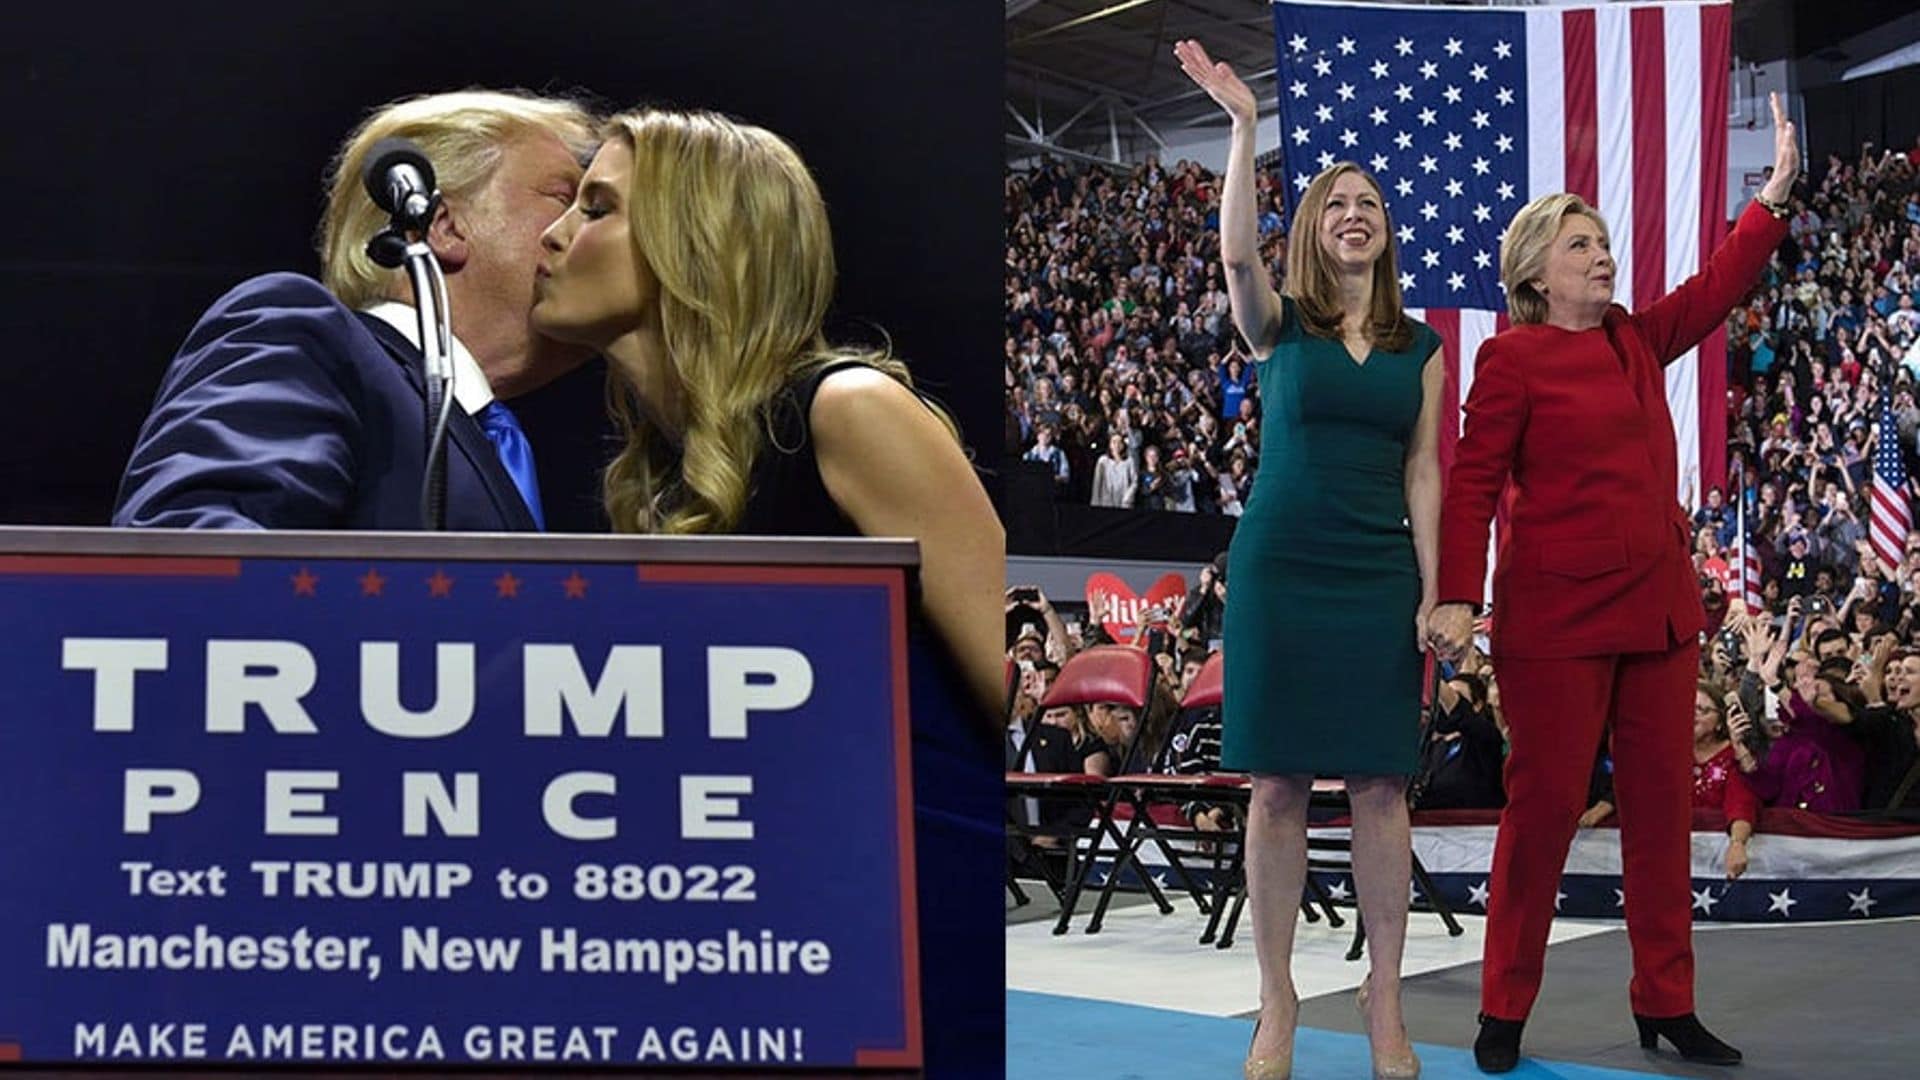 How friends Ivanka Trump and Chelsea Clinton spent election eve